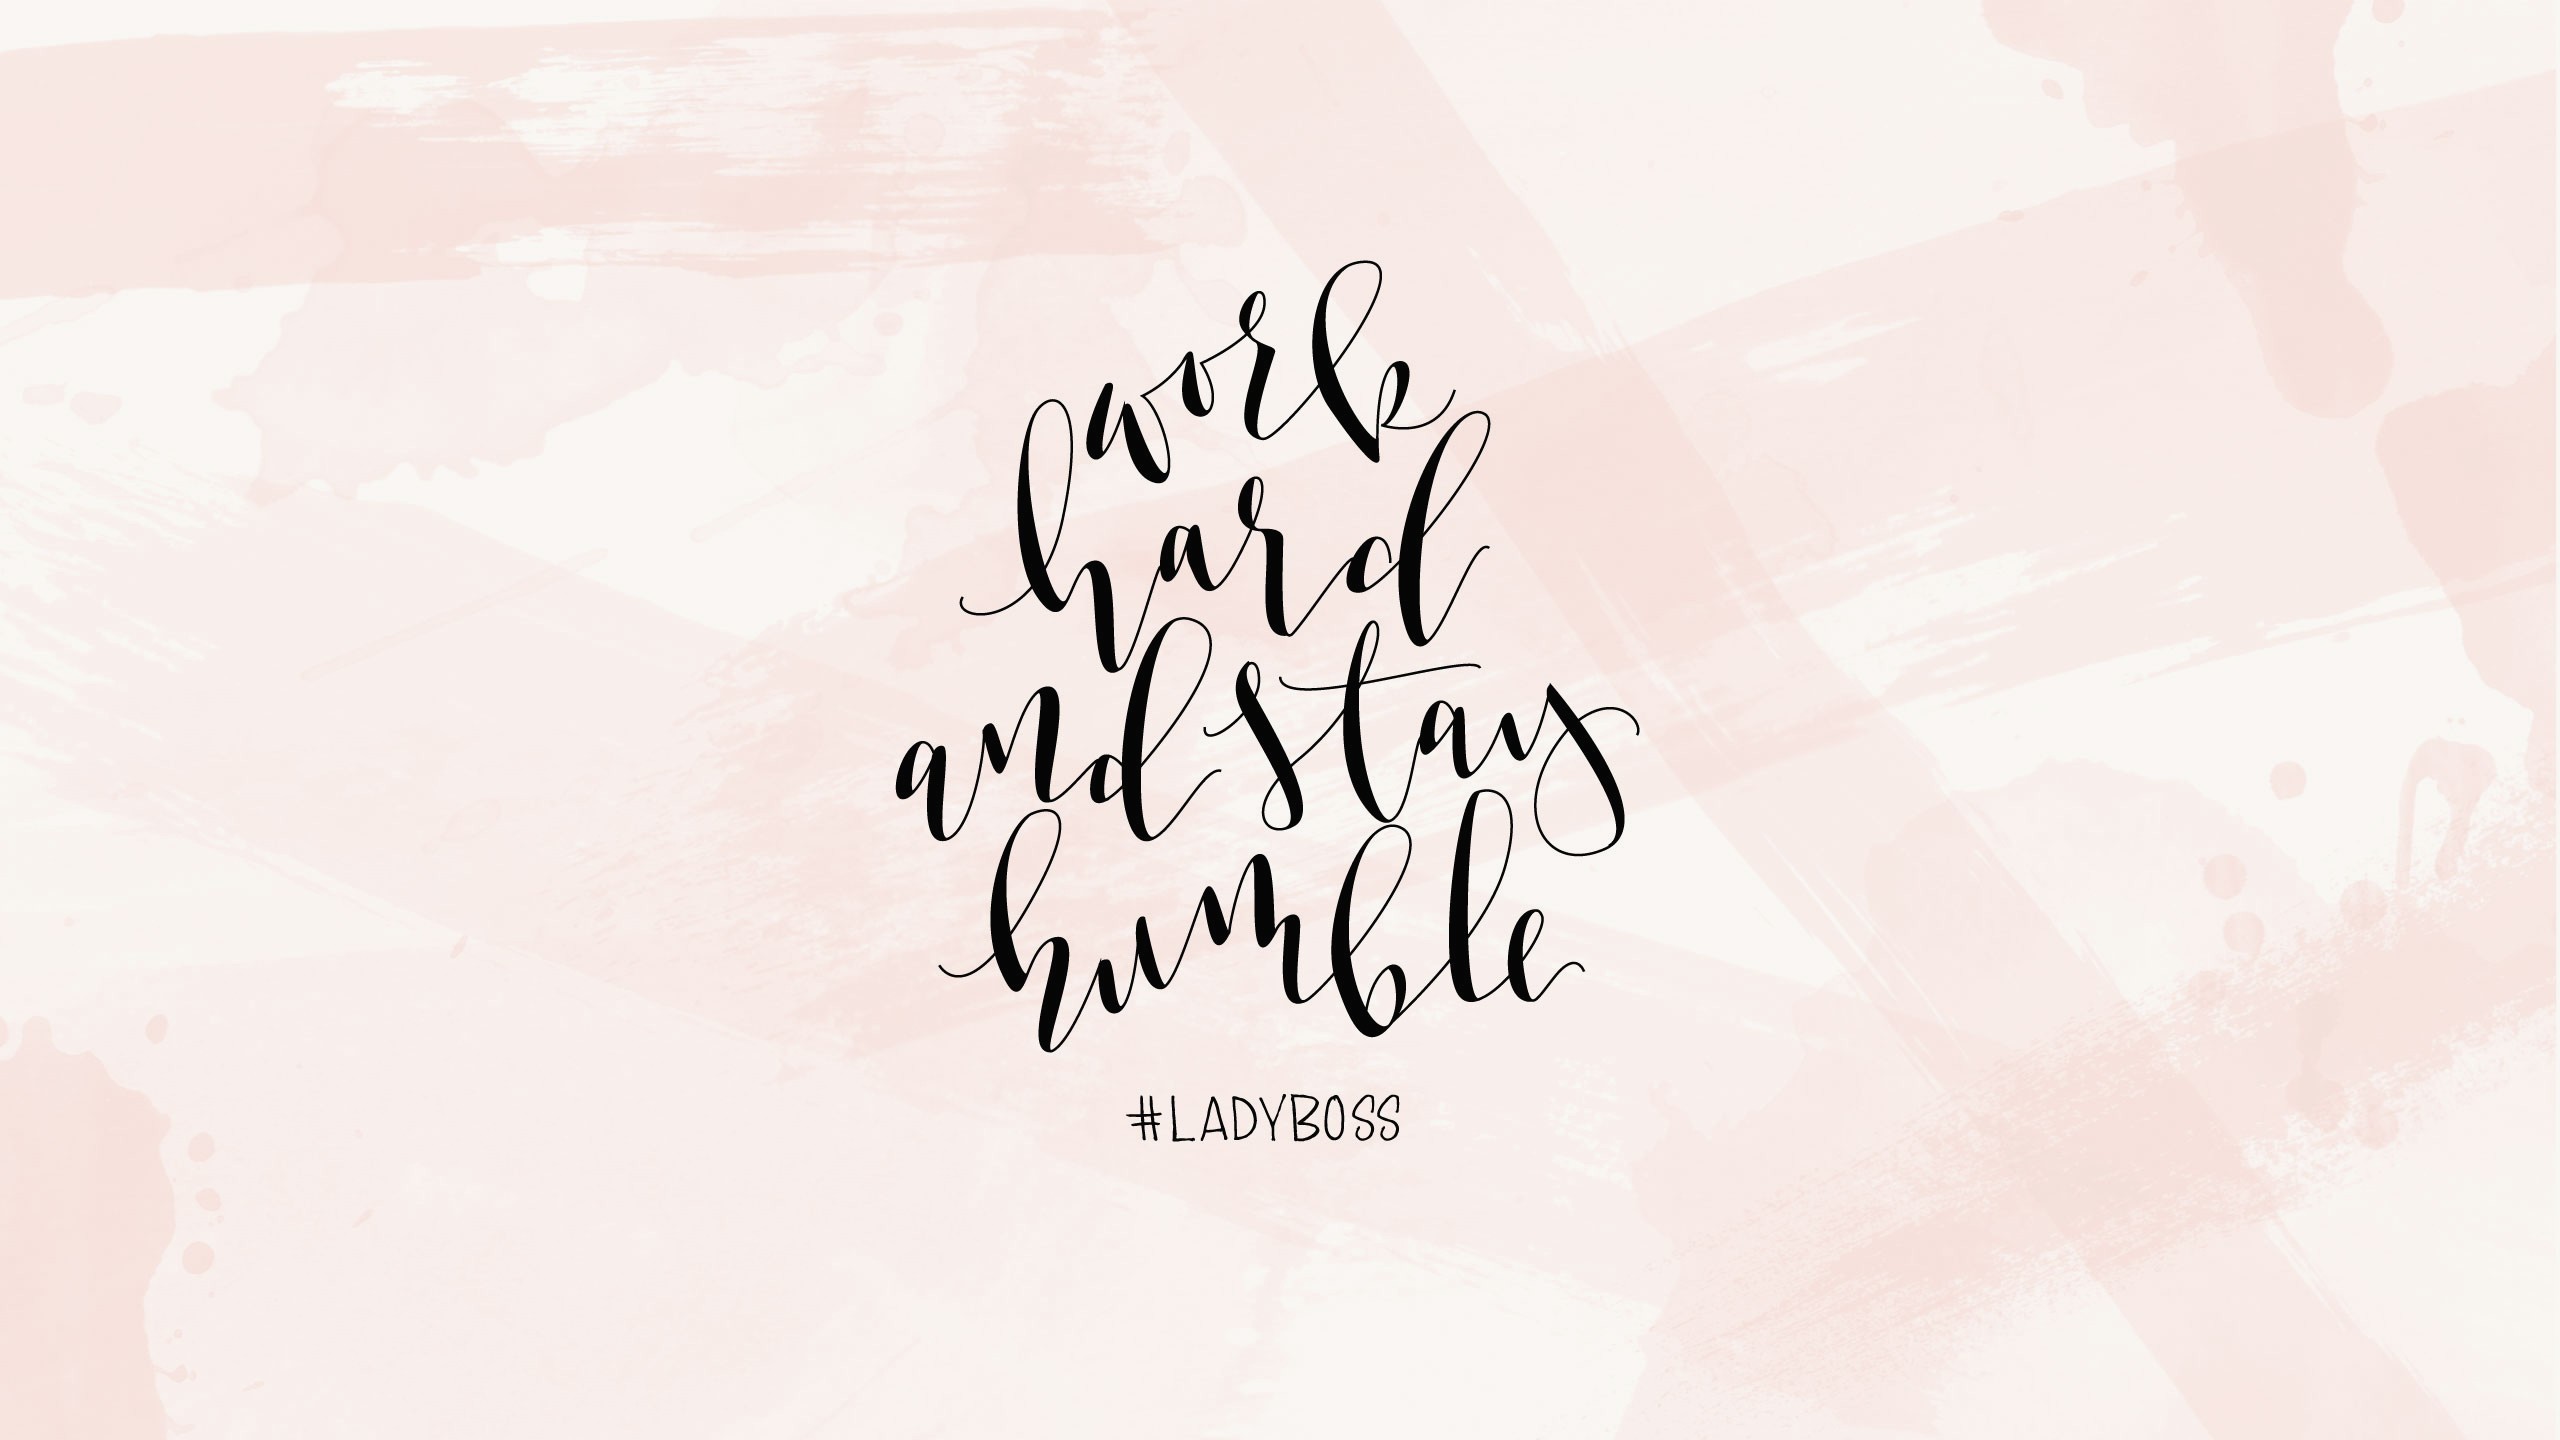 2560x1440 Wallpaper for iPhone Girly Quotes Best 10 Paris themed Wallpapers for You  ÃÂ¾ Â± Â¾